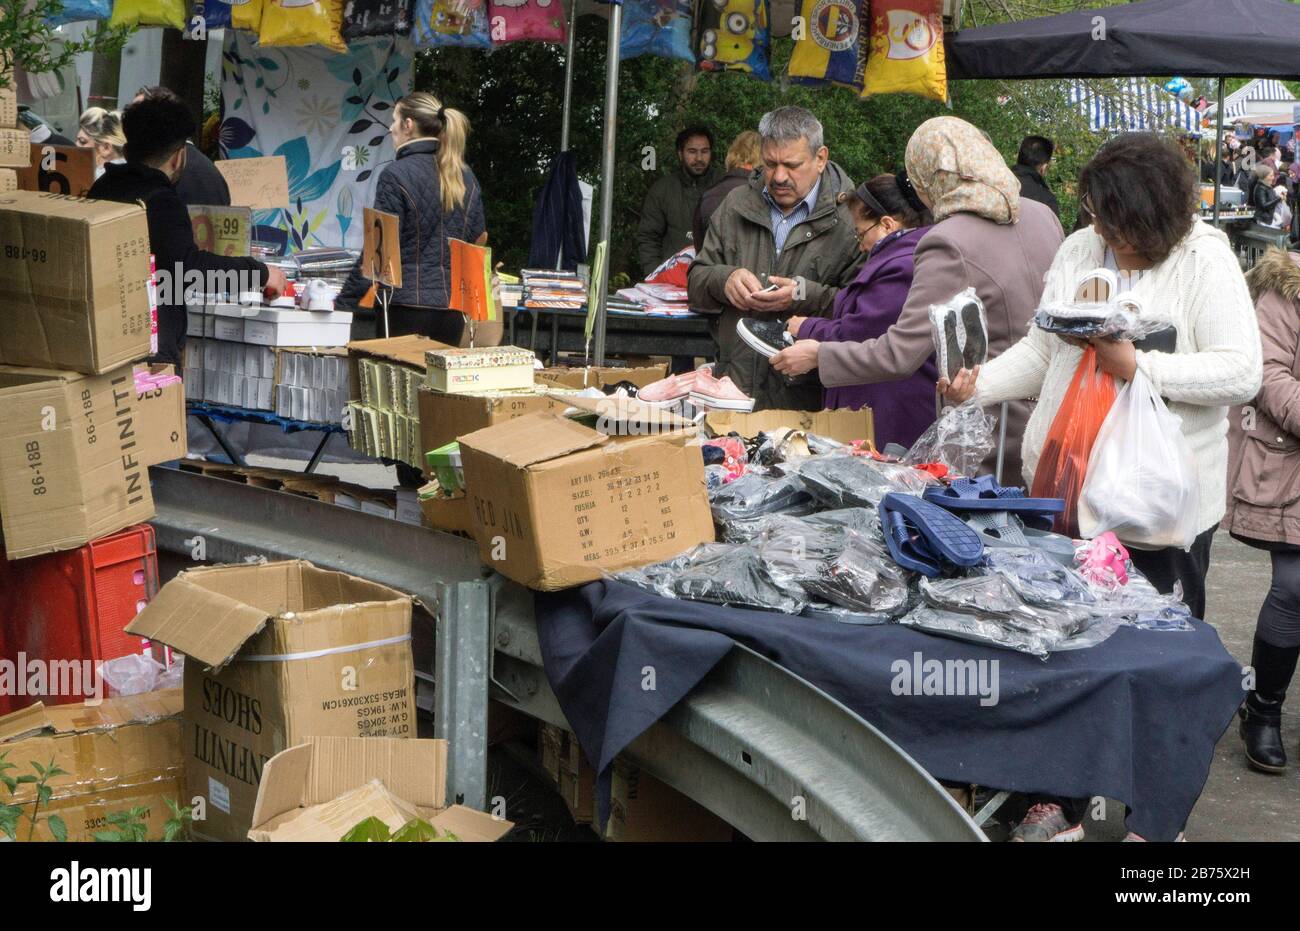 Flea market in Gelsenkirchen, 22.04.2017.With an unemployment rate of 14% (January 2017) and a foreigner share of almost 20%, the city of Gelsenkirchen is facing great social problems. [automated translation] Stock Photo